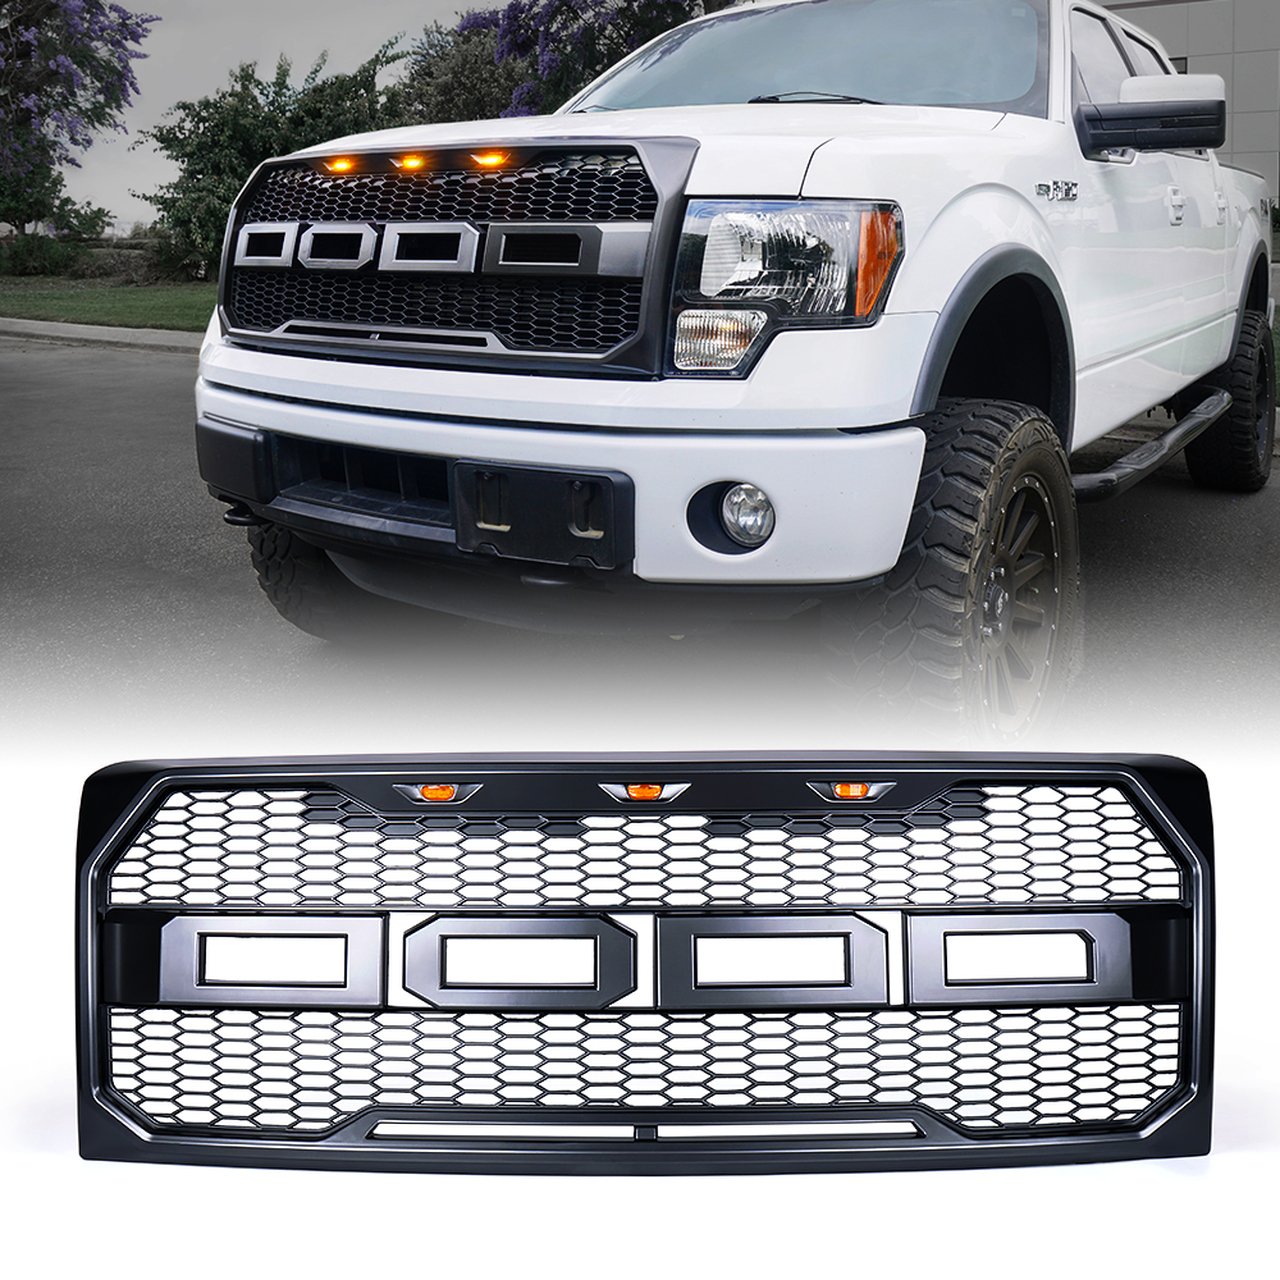 OEM Grille for 2009-2014 Ford F150 Raptor Style Front Bumper Grille